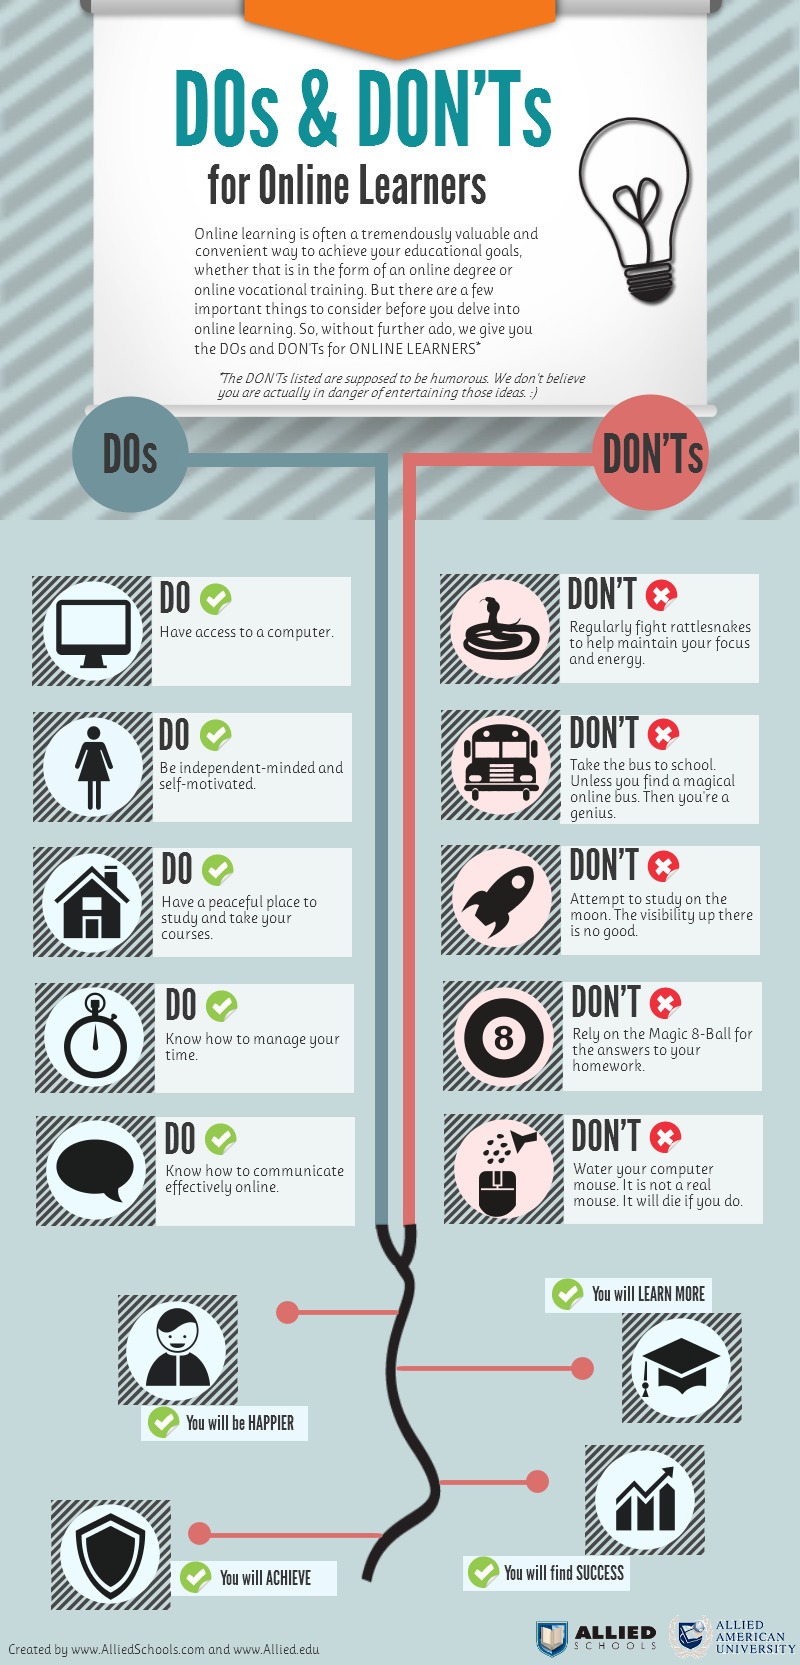 What Online Learnes Should and Shouldn't Do Infographic